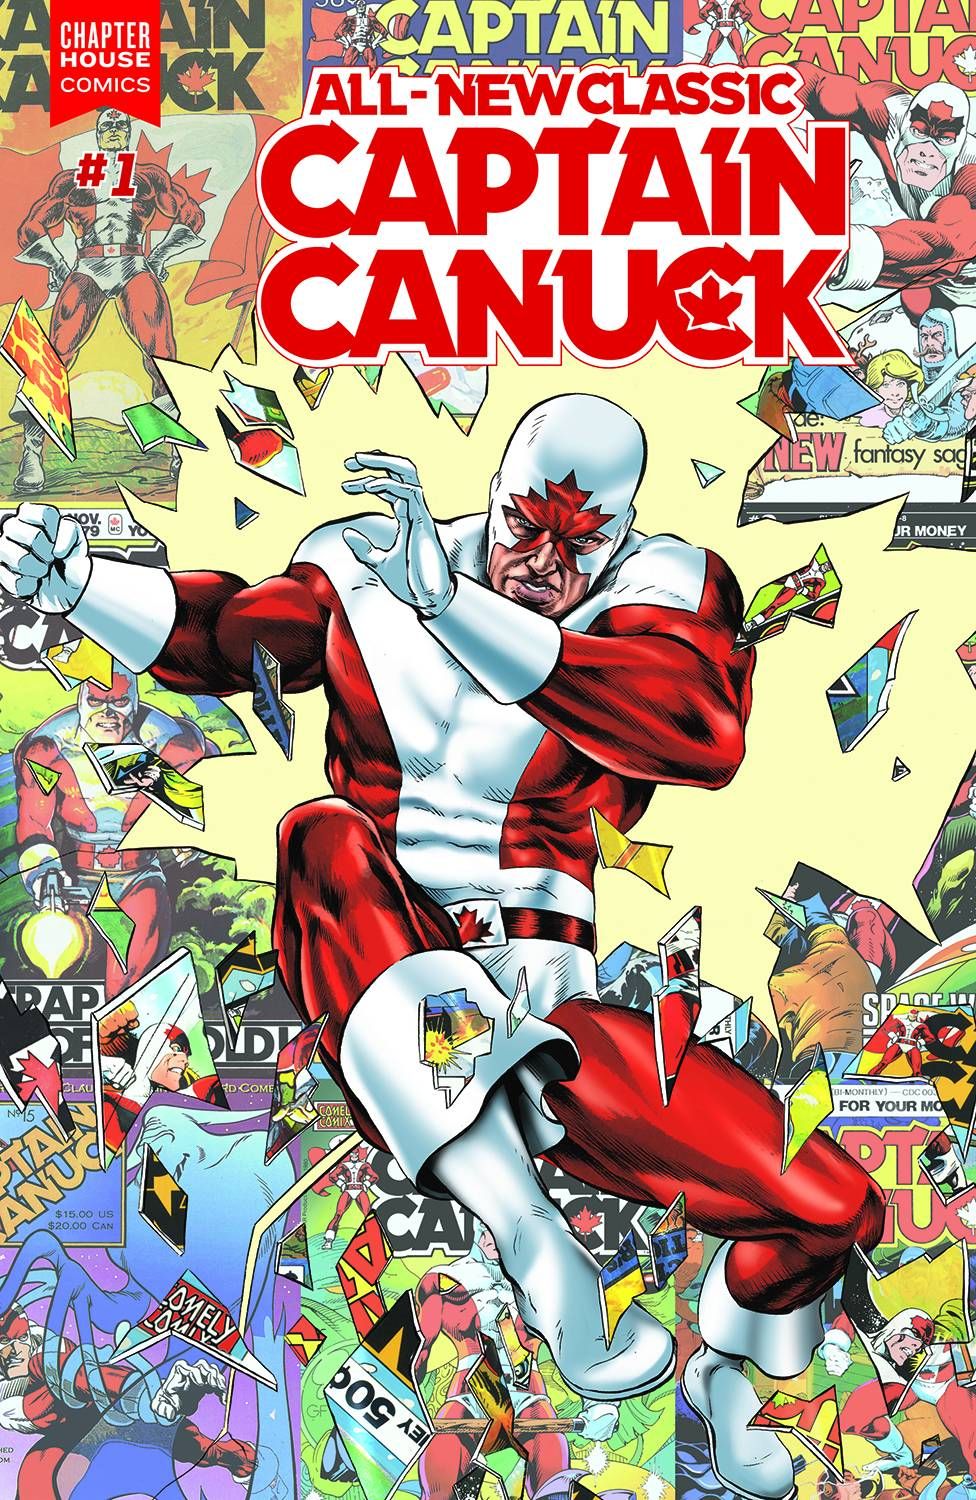 All-New Classic Captain Canuck #1 Comic